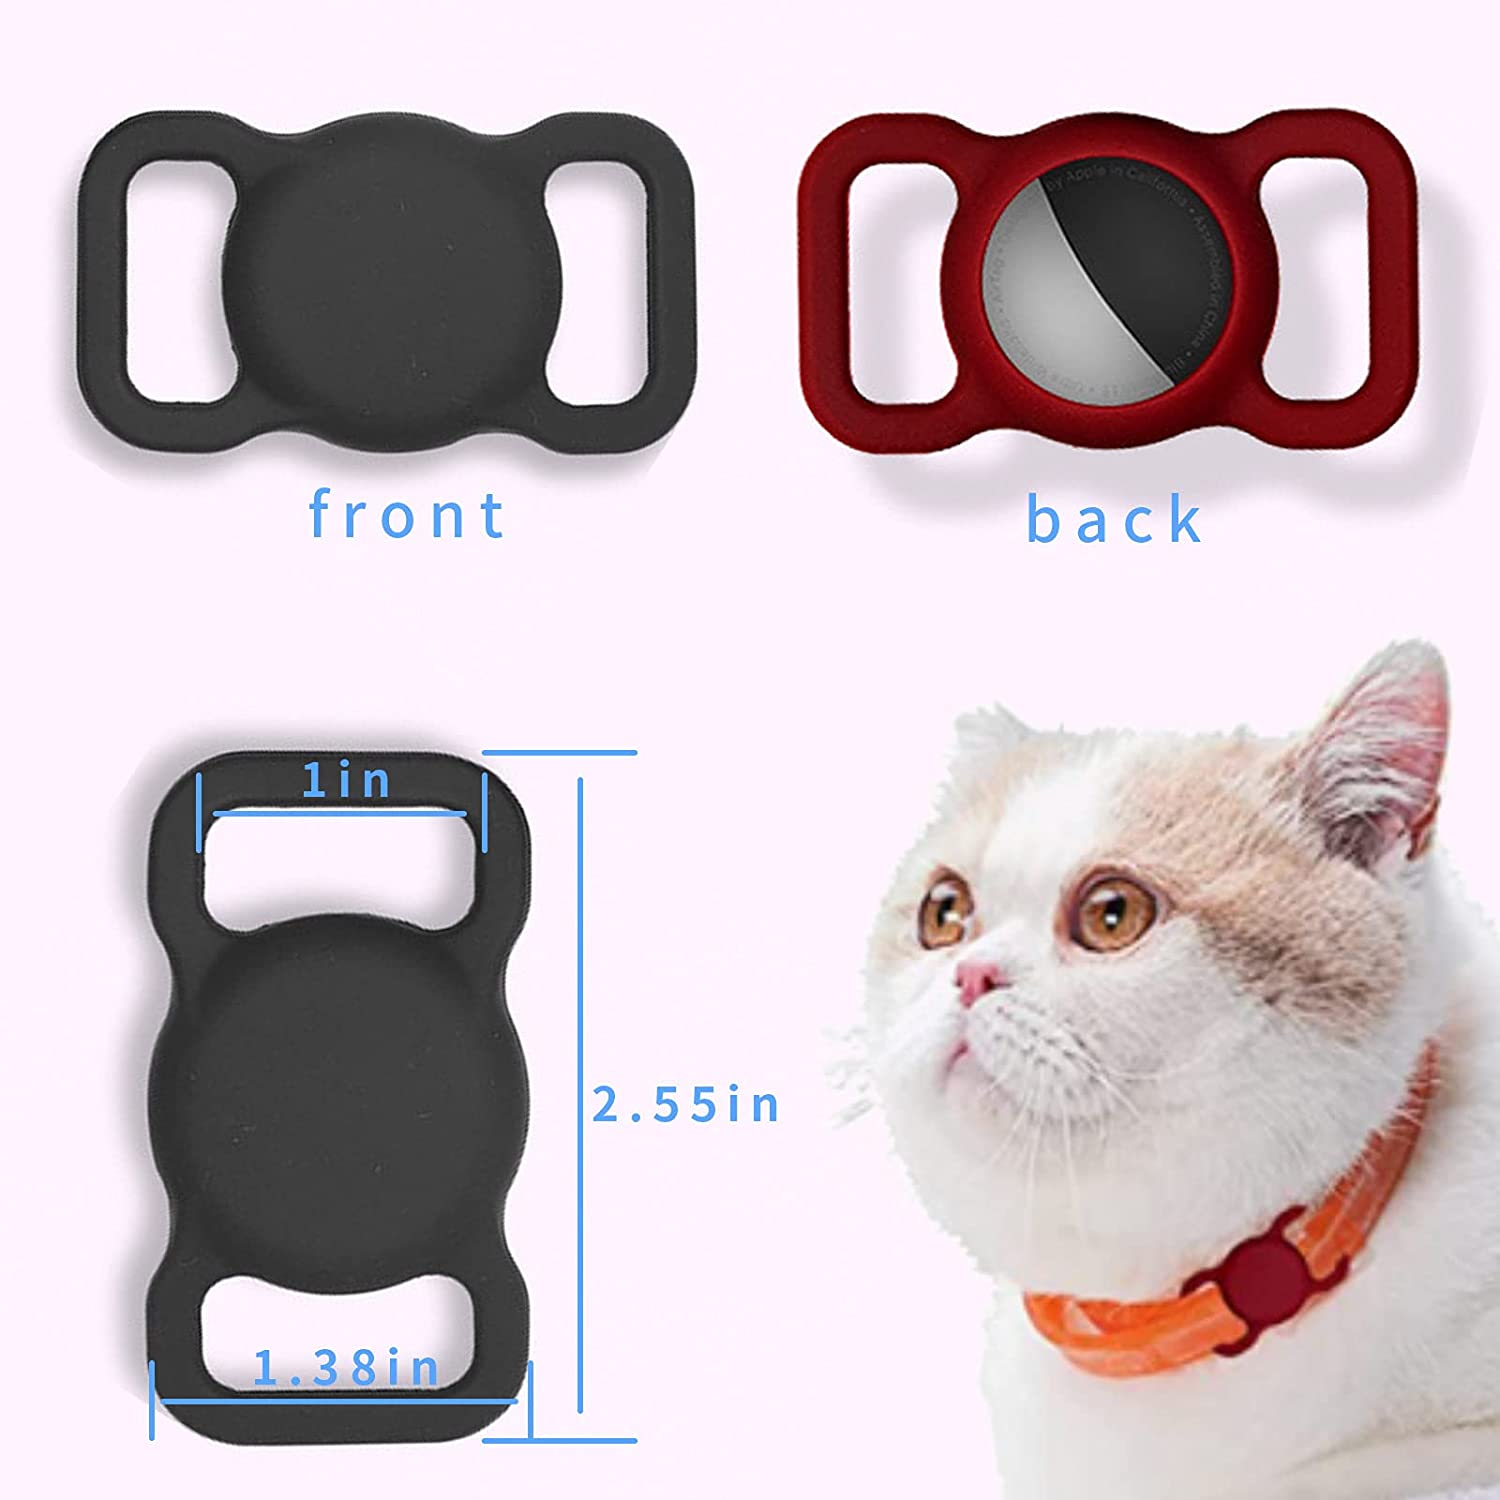 Air Tag Dog Collar Holder Waterproof Small Compatible Protective Cover for Apple Airtag GPS Tracking Dog Cat Soft Silicone Waterproof Protective for Pet Dog Cat and Children Elderly Bags Electronics > GPS Accessories > GPS Cases YAFIYGI   